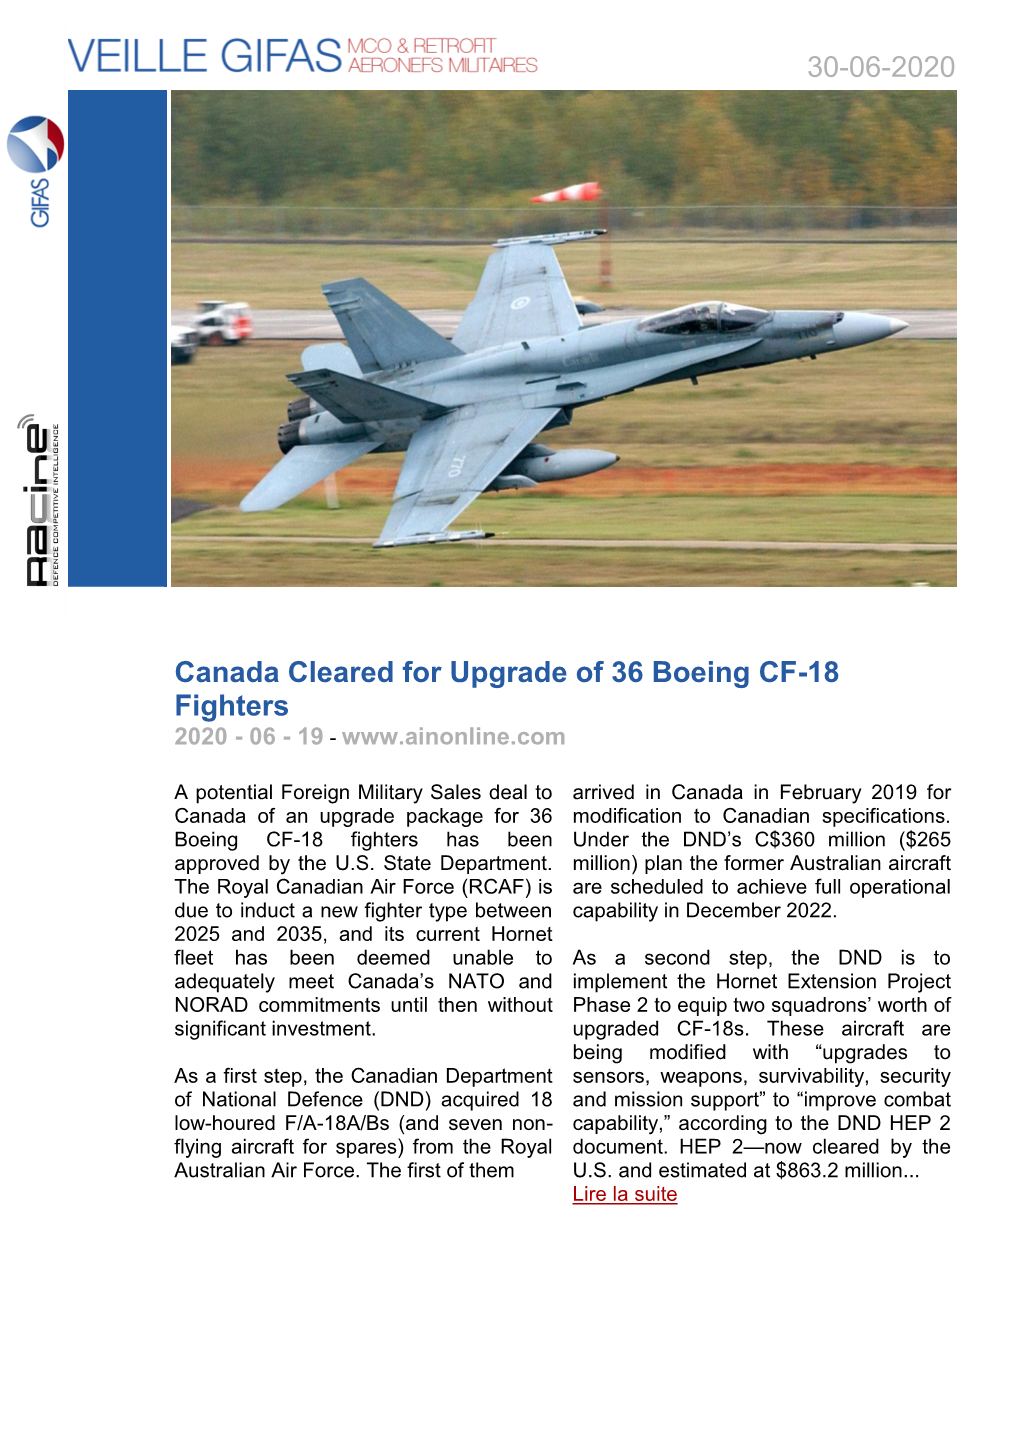 30-06-2020 Canada Cleared for Upgrade of 36 Boeing CF-18 Fighters